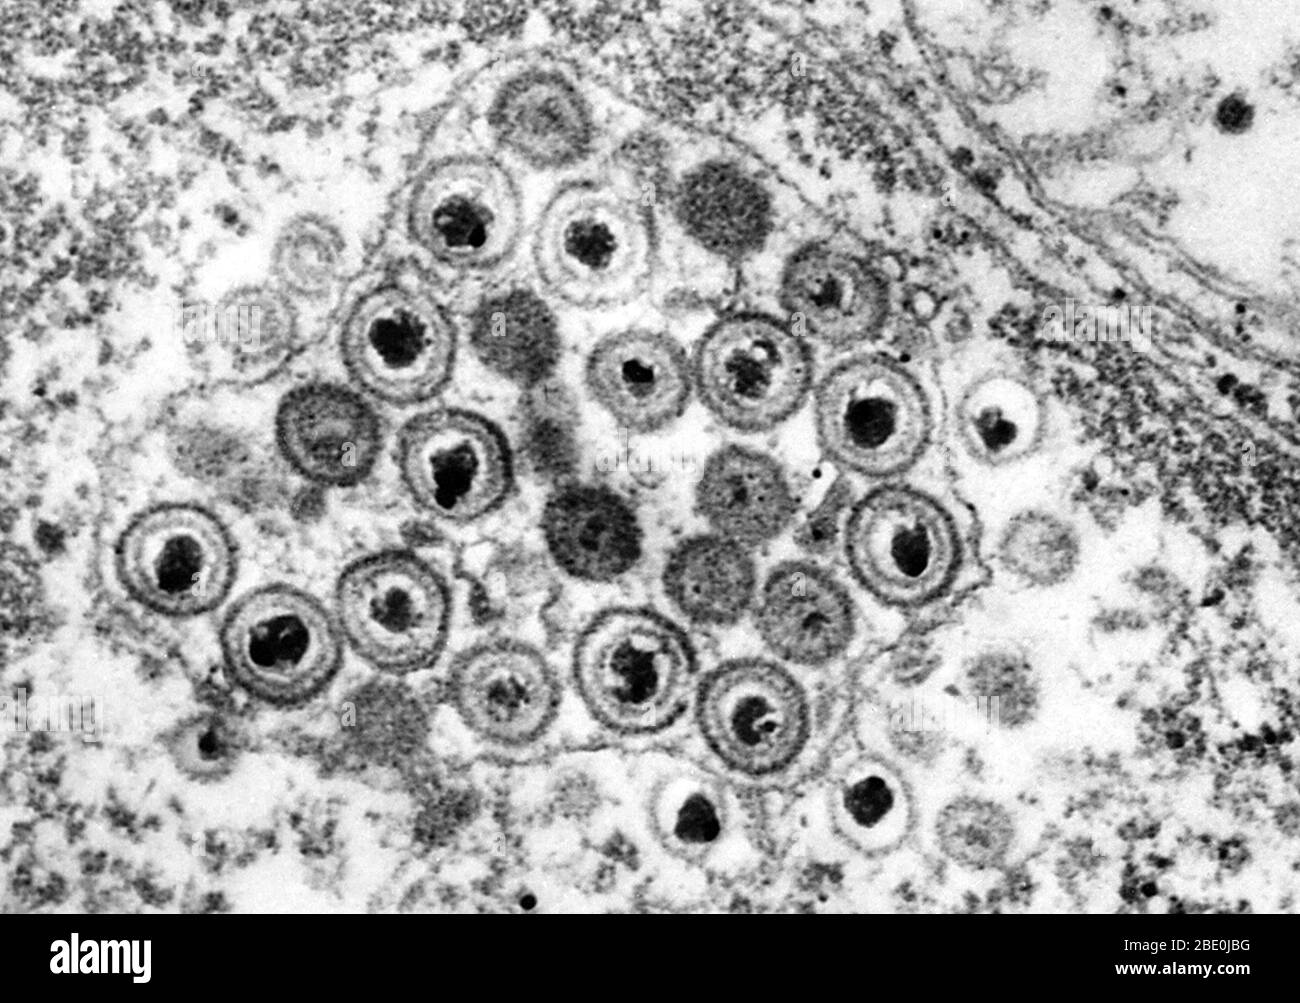 Negative stained Transmission Electron Micrograph (TEM) revealing the presence of numerous herpes simplex virions located inside the nucleus in this tissue sample. Genital herpes is a genital infection caused by the herpes simplex virus (HSV). Most individuals carrying herpes are unaware they have been infected and many will never suffer an outbreak, which involves blisters similar to cold sores. While there is no cure for herpes, over time symptoms are increasingly mild and outbreaks are decreasingly frequent. The typical manifestation of a primary infection is clusters of genital sores consi Stock Photo